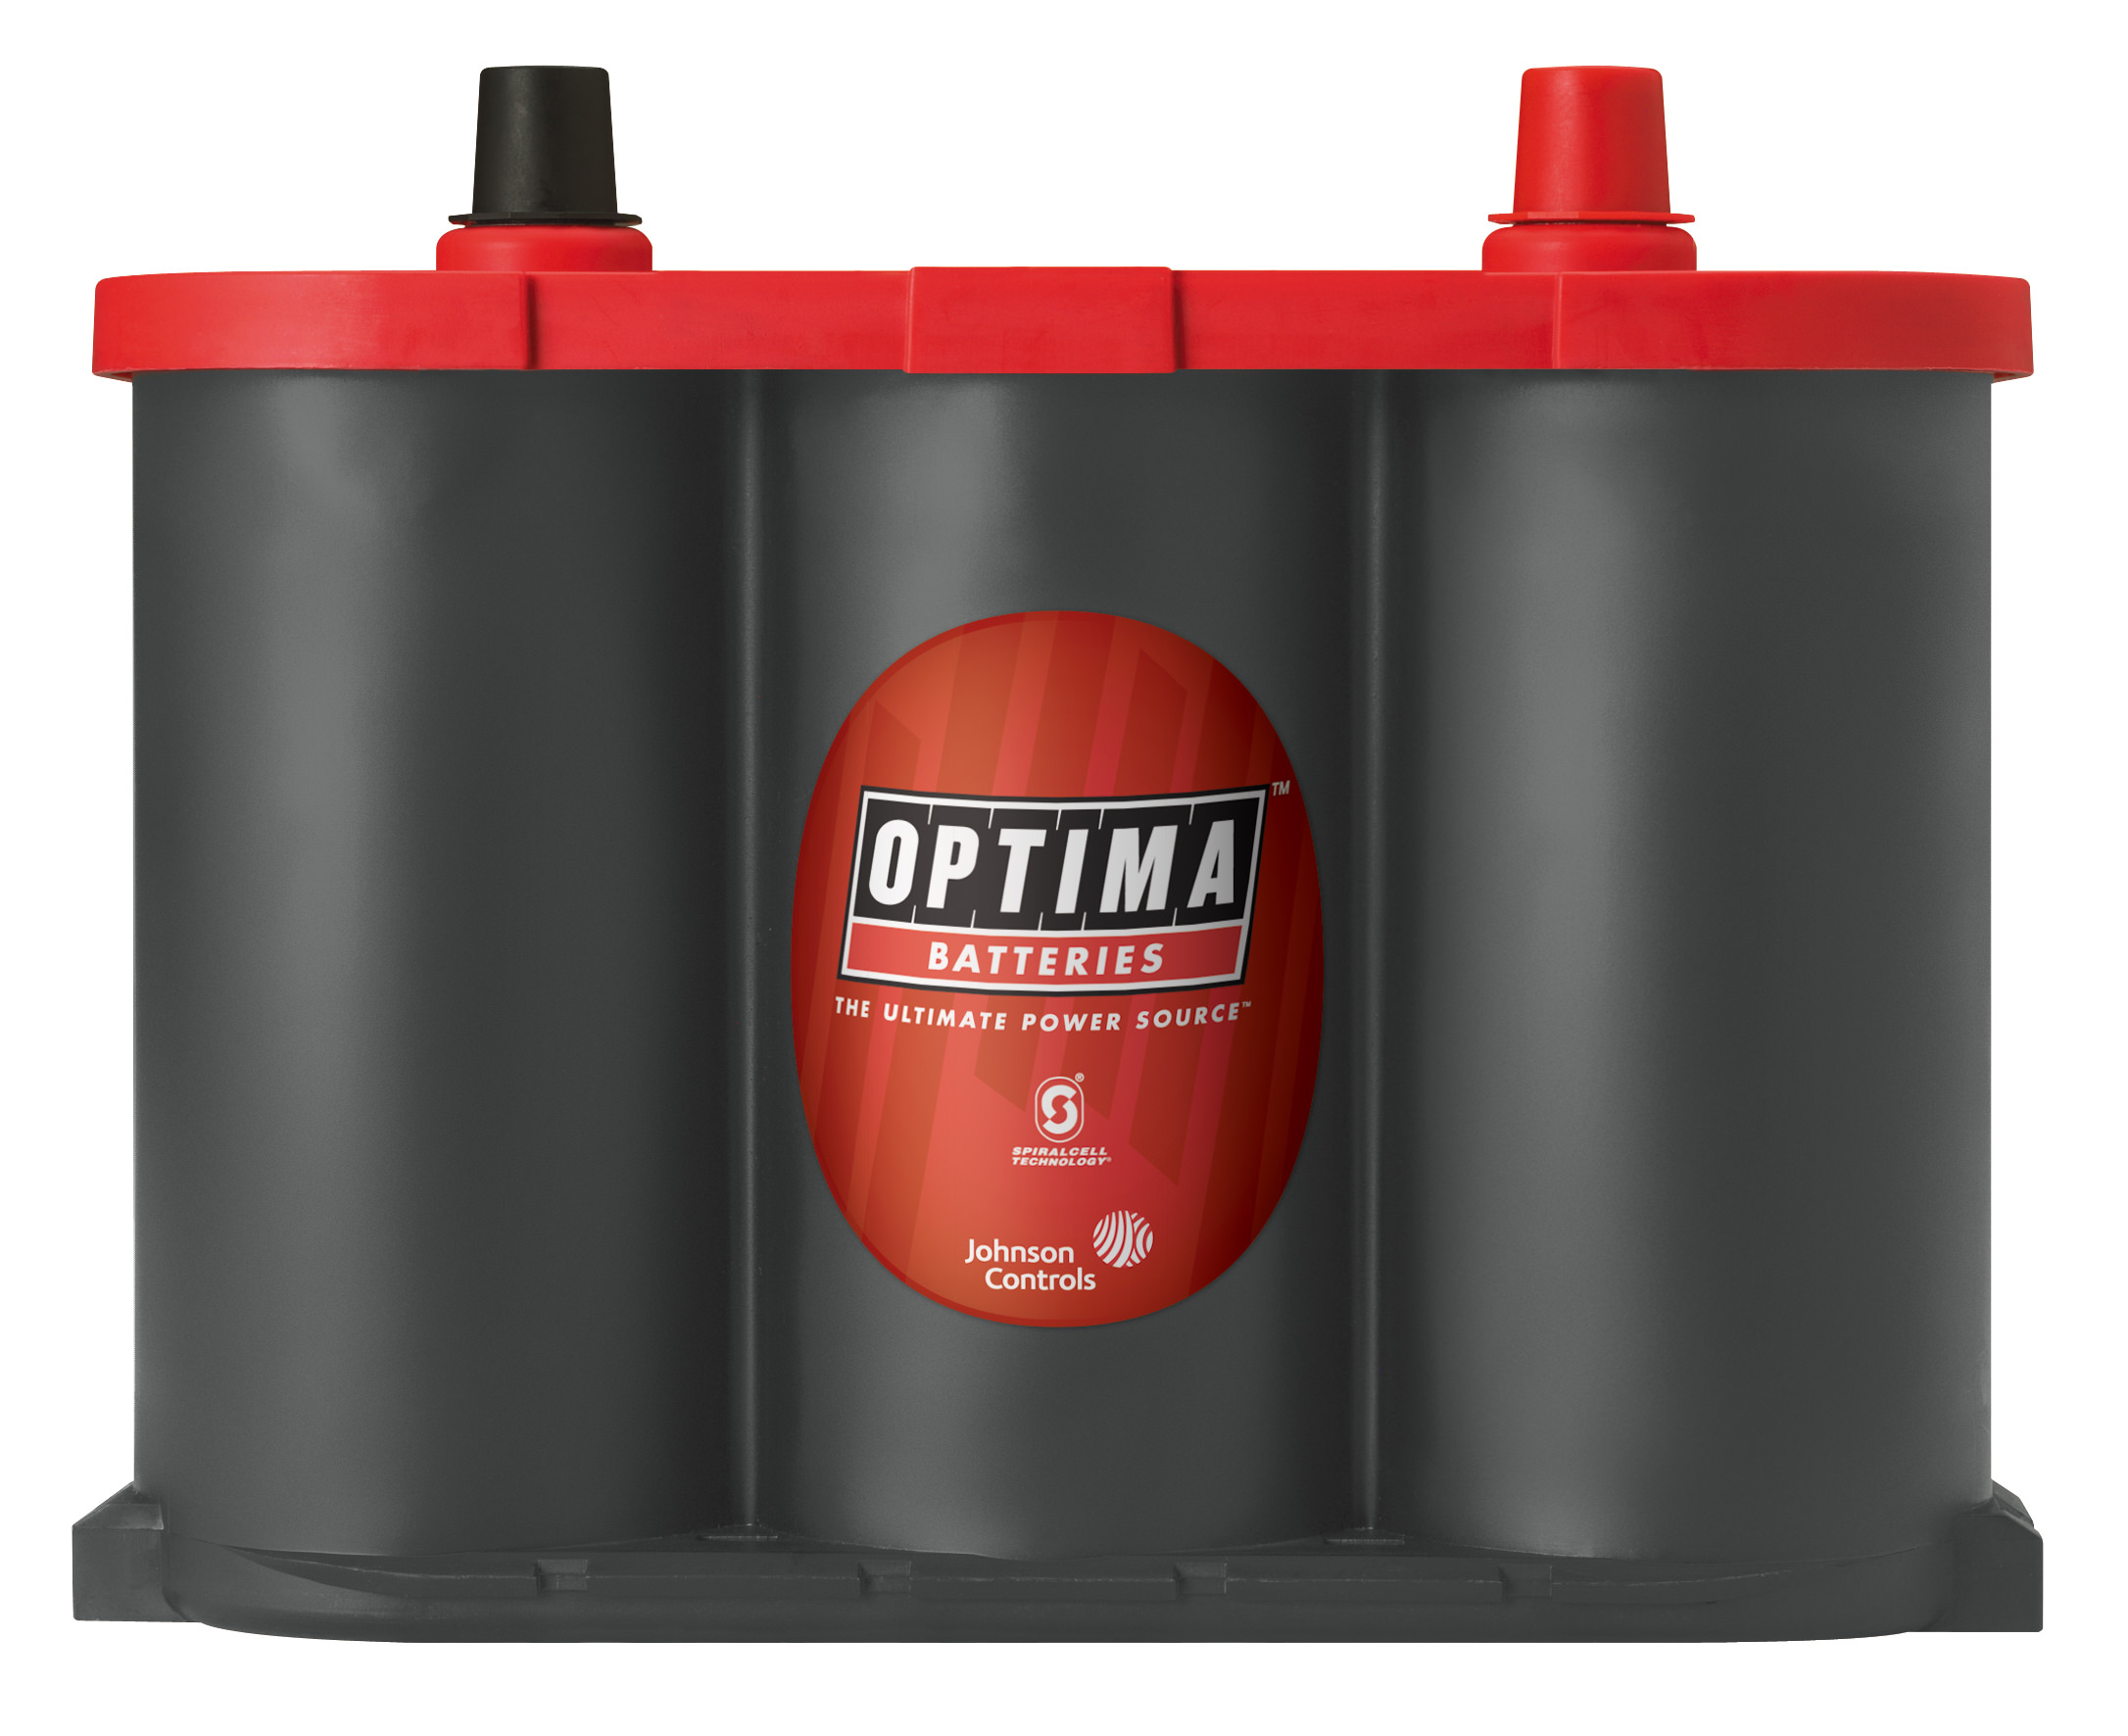 OPTIMA RedTop AGM Spiralcell Automotive Starting Battery, Group Size 34R, 12 Volt 800 CCA - image 4 of 5